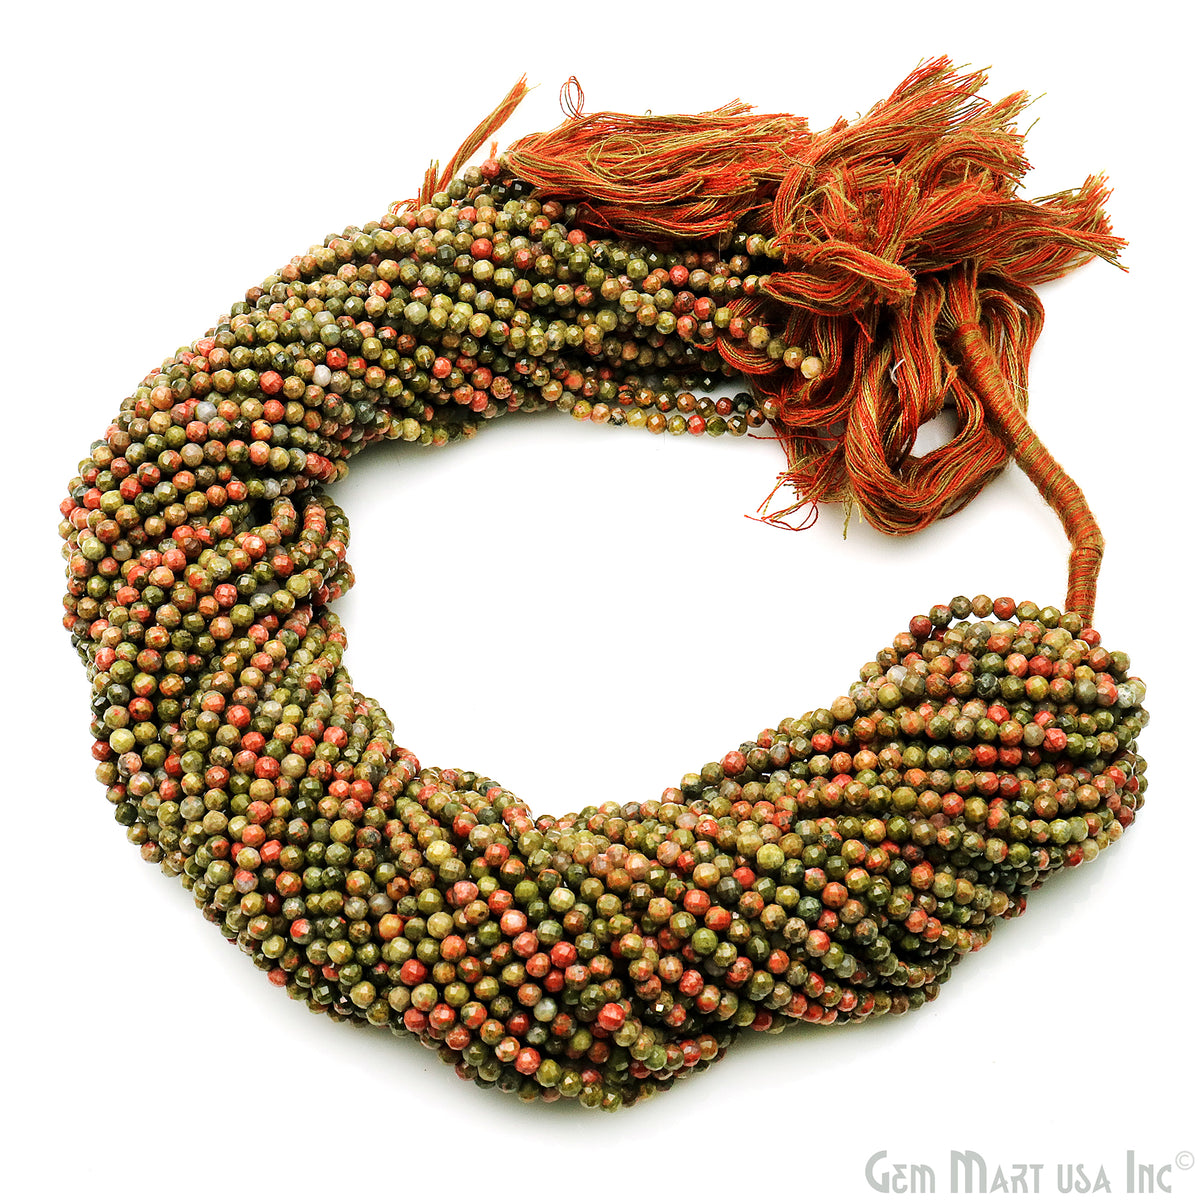 Unakite Faceted 3mm Gemstone Rondelle Beads 1 Strand